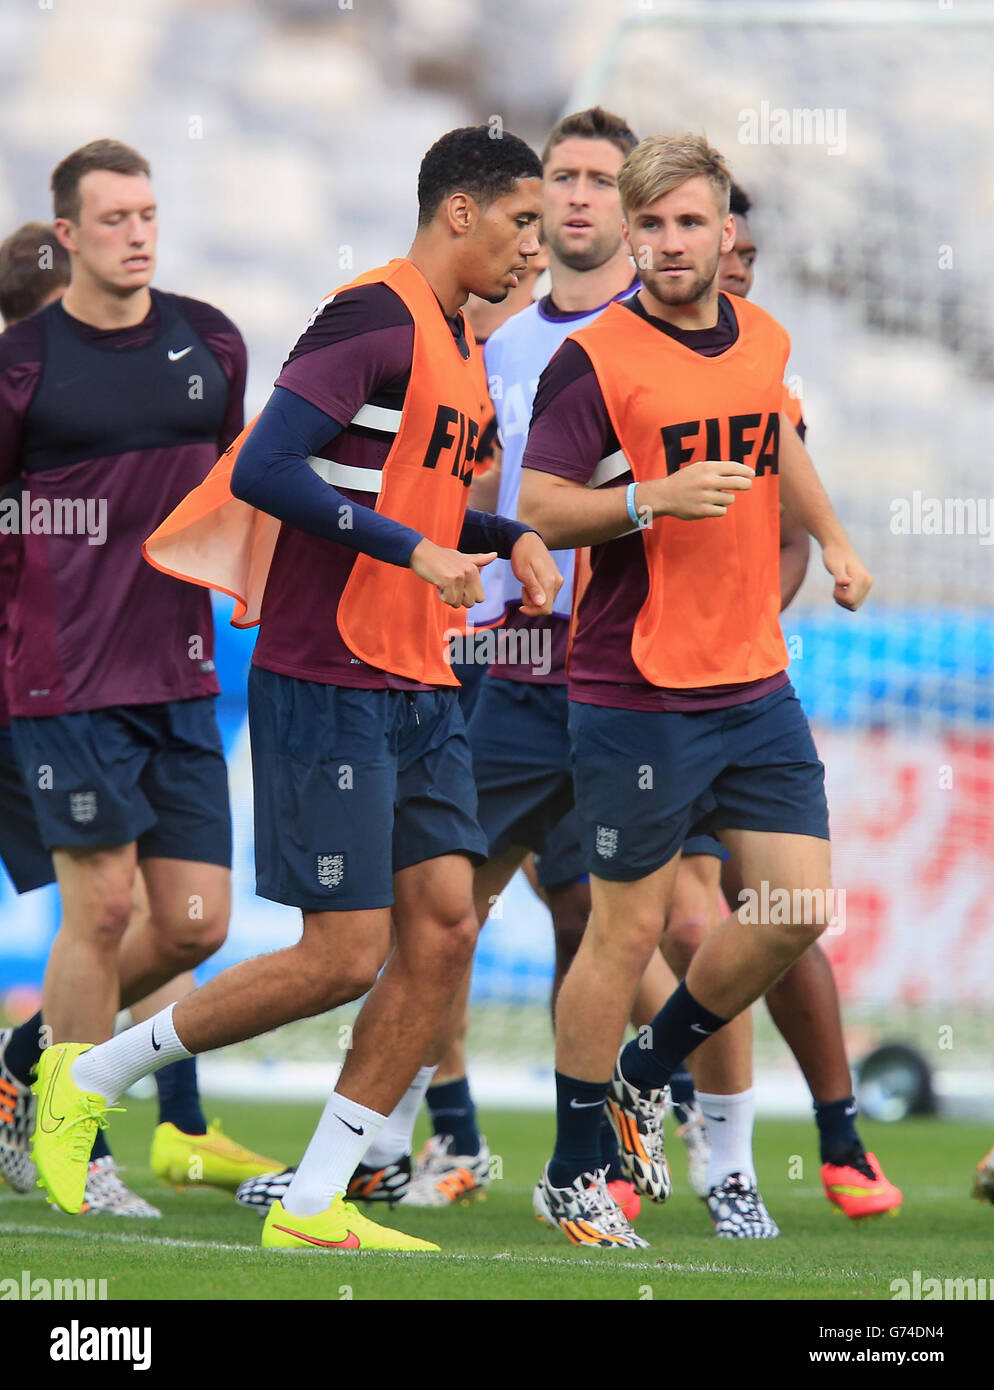 Soccer - FIFA World Cup 2014 - Group D - Costa Rica v England - Day Three - England Training and Press Conference - Estadio M.... England's Luke Shaw chats with Chris Smalling during a training session at the Estadio Mineirao, Belo Horizonte, Brazil. Stock Photo